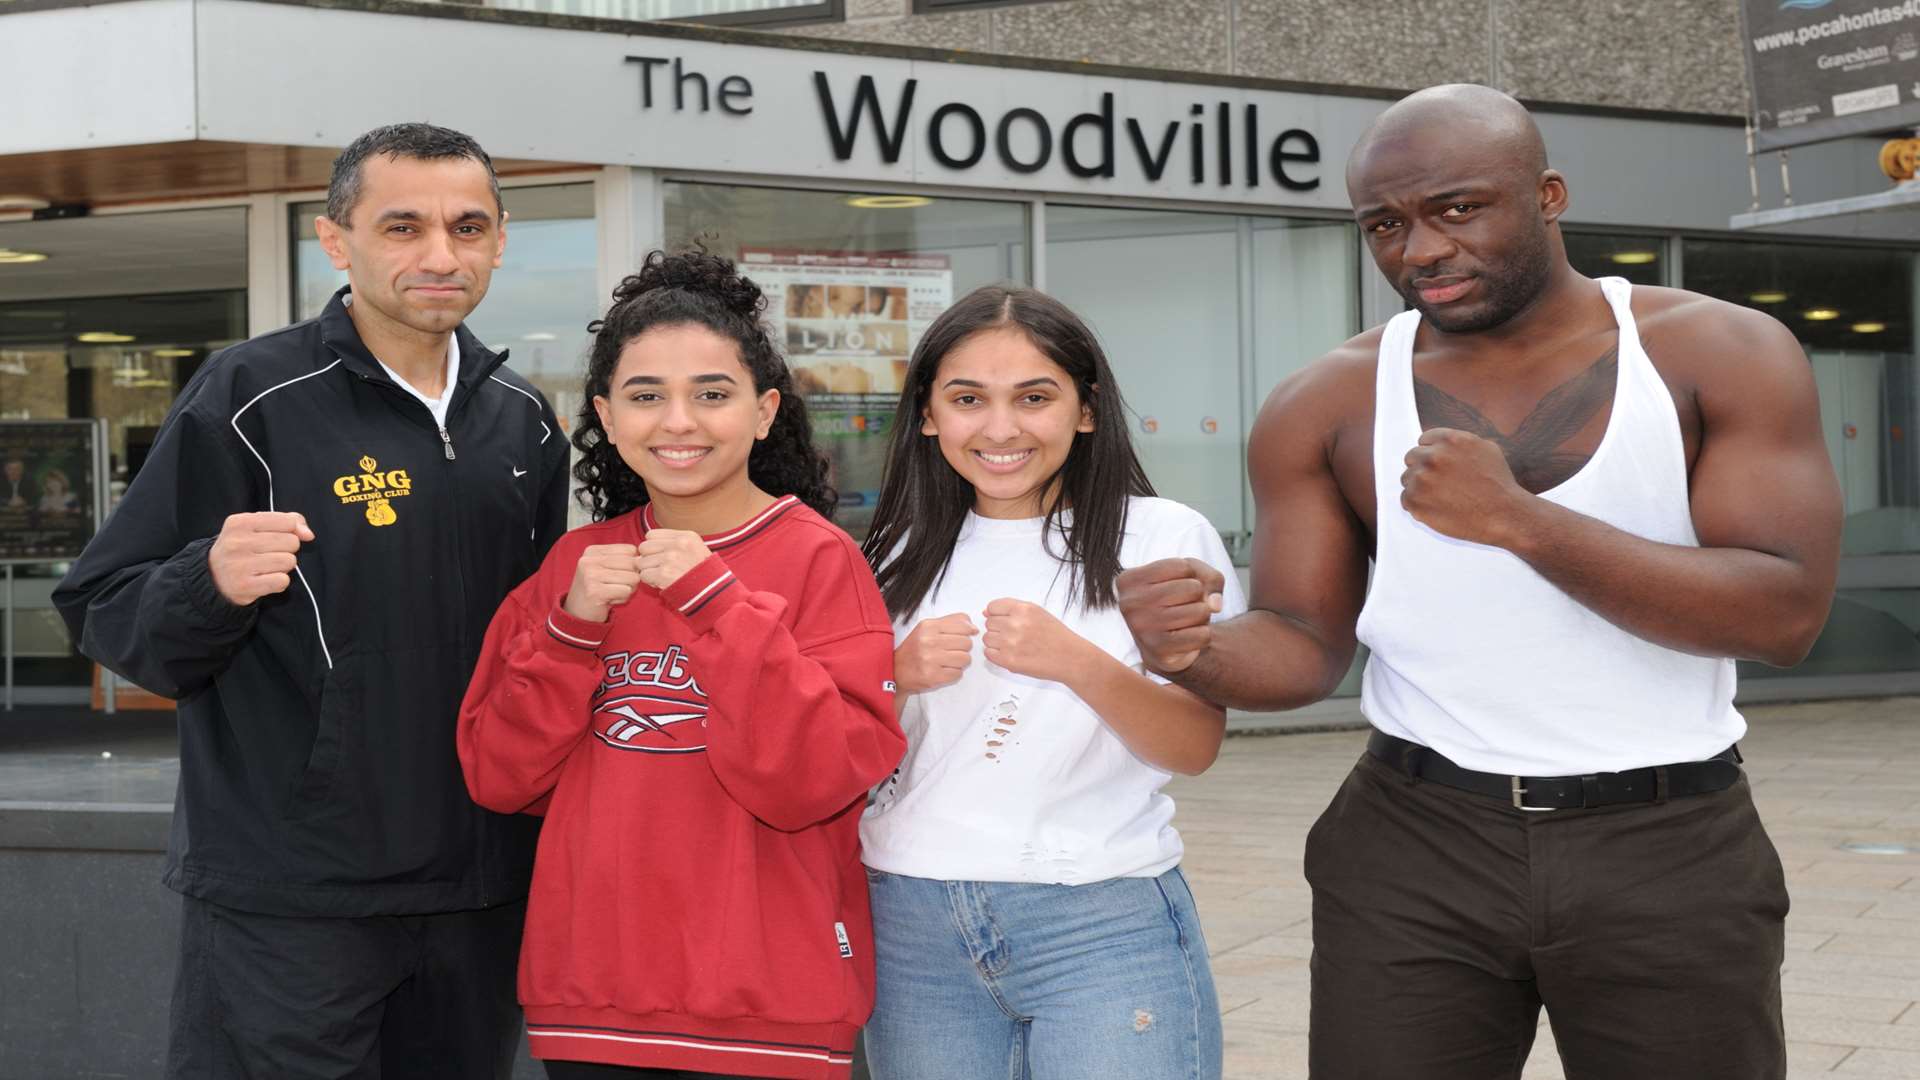 L/R: Will Dale, Jasmine Dale, Jessie Dale, from GNG Boxing Club, actor Nathan Medina